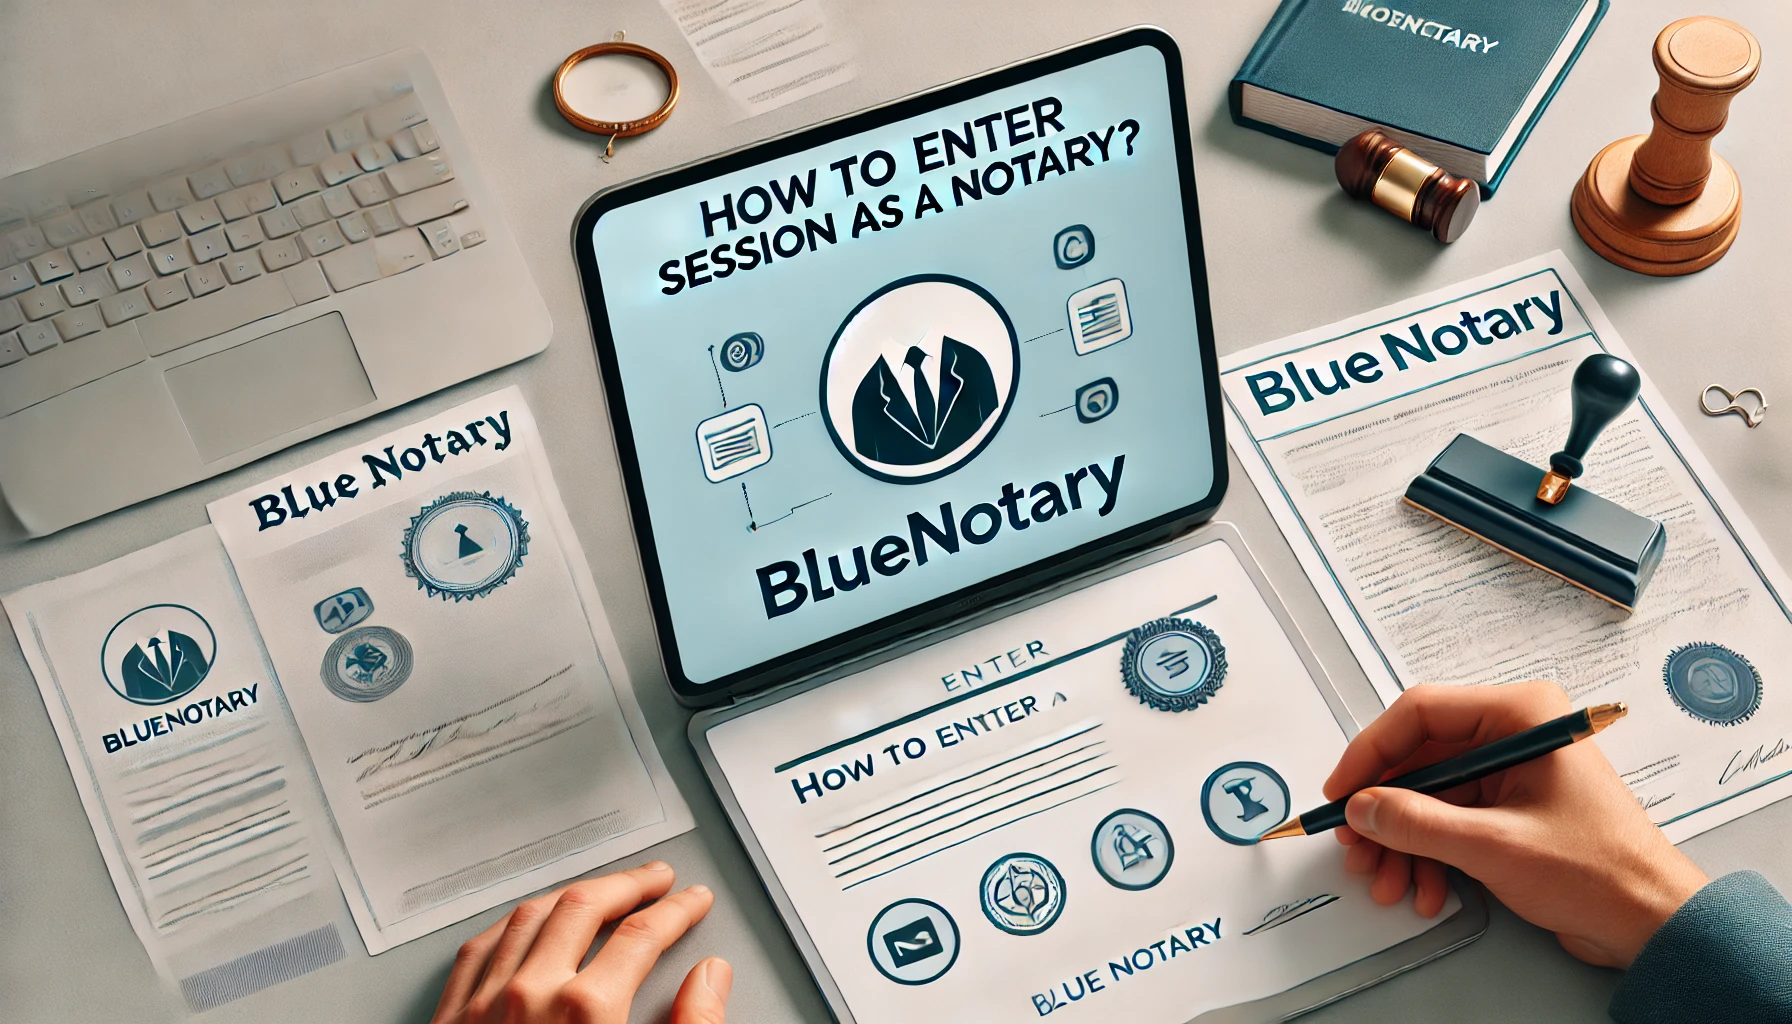 How to Enter a Session as a Notary